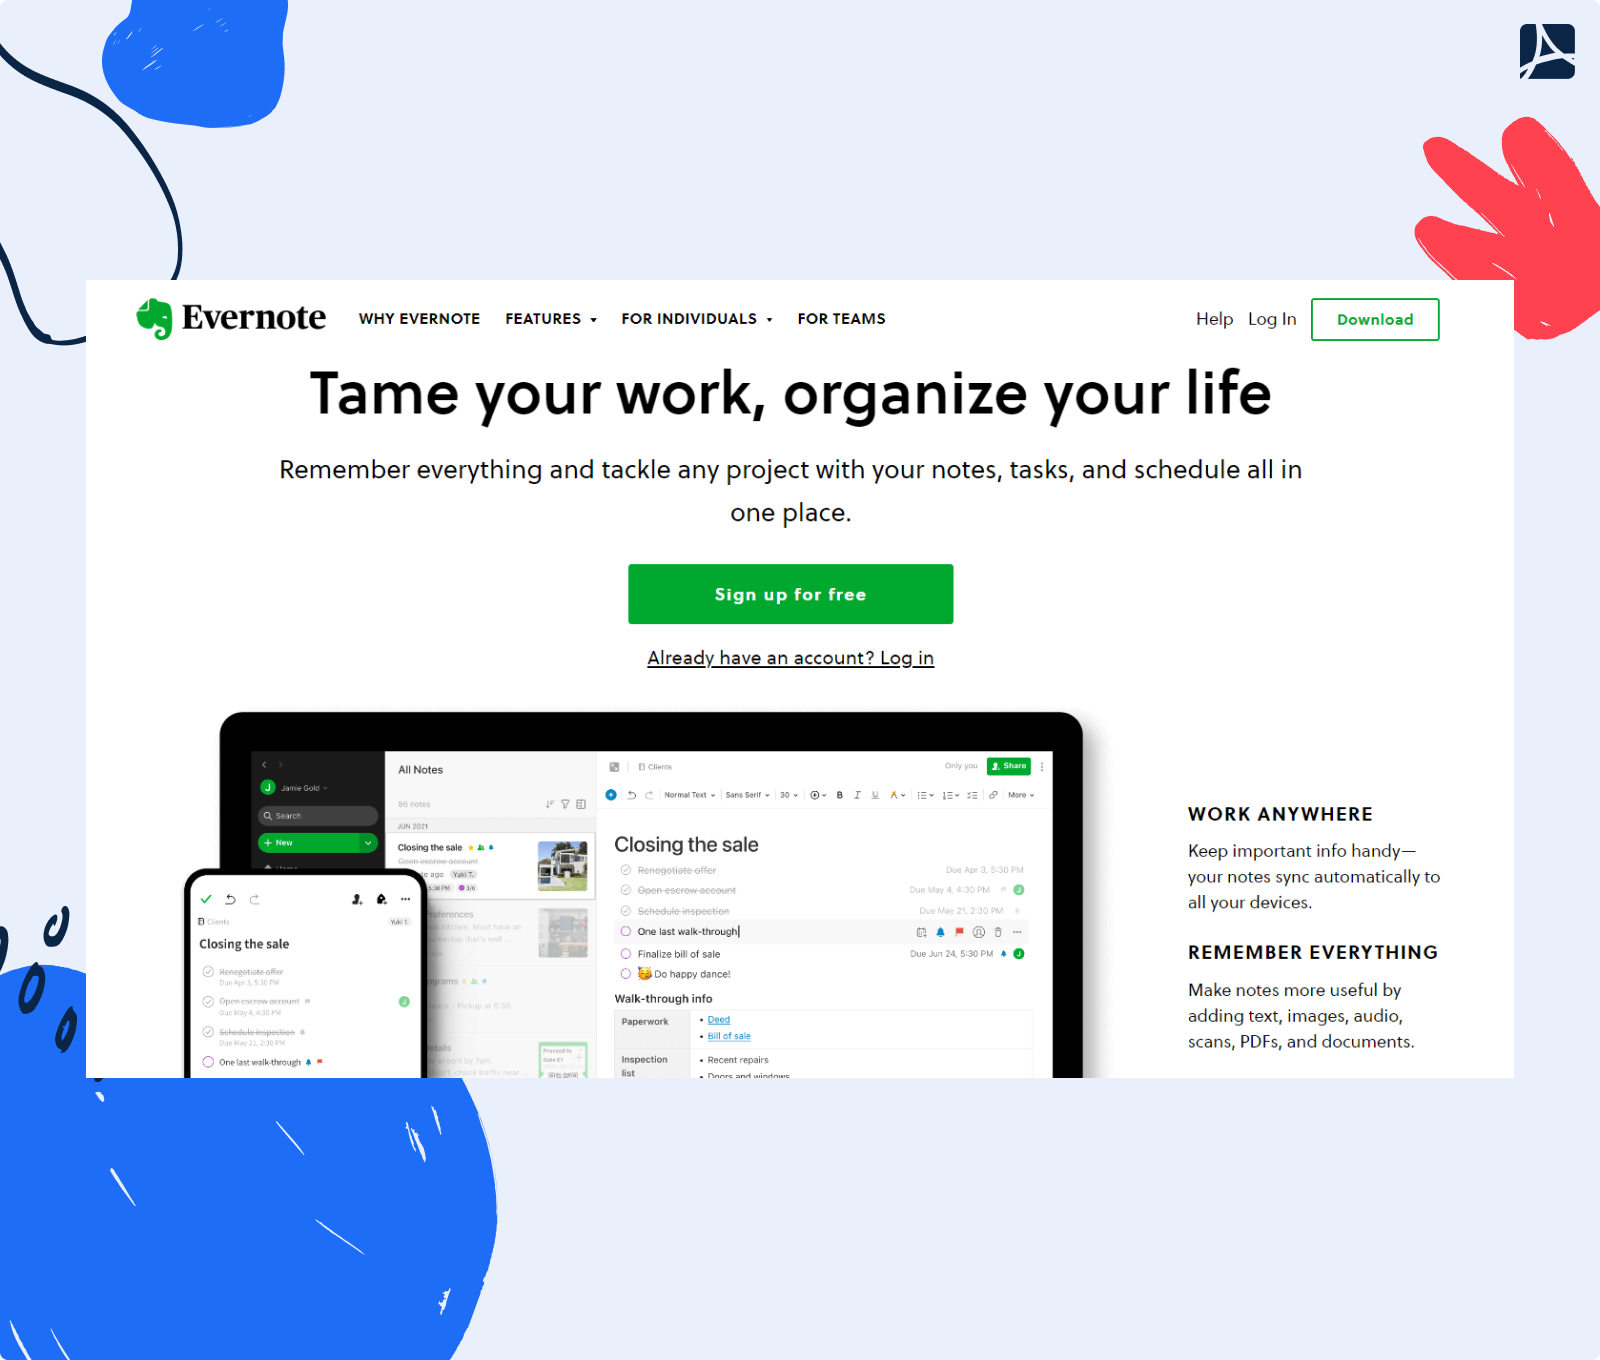 Main page of Evernote 